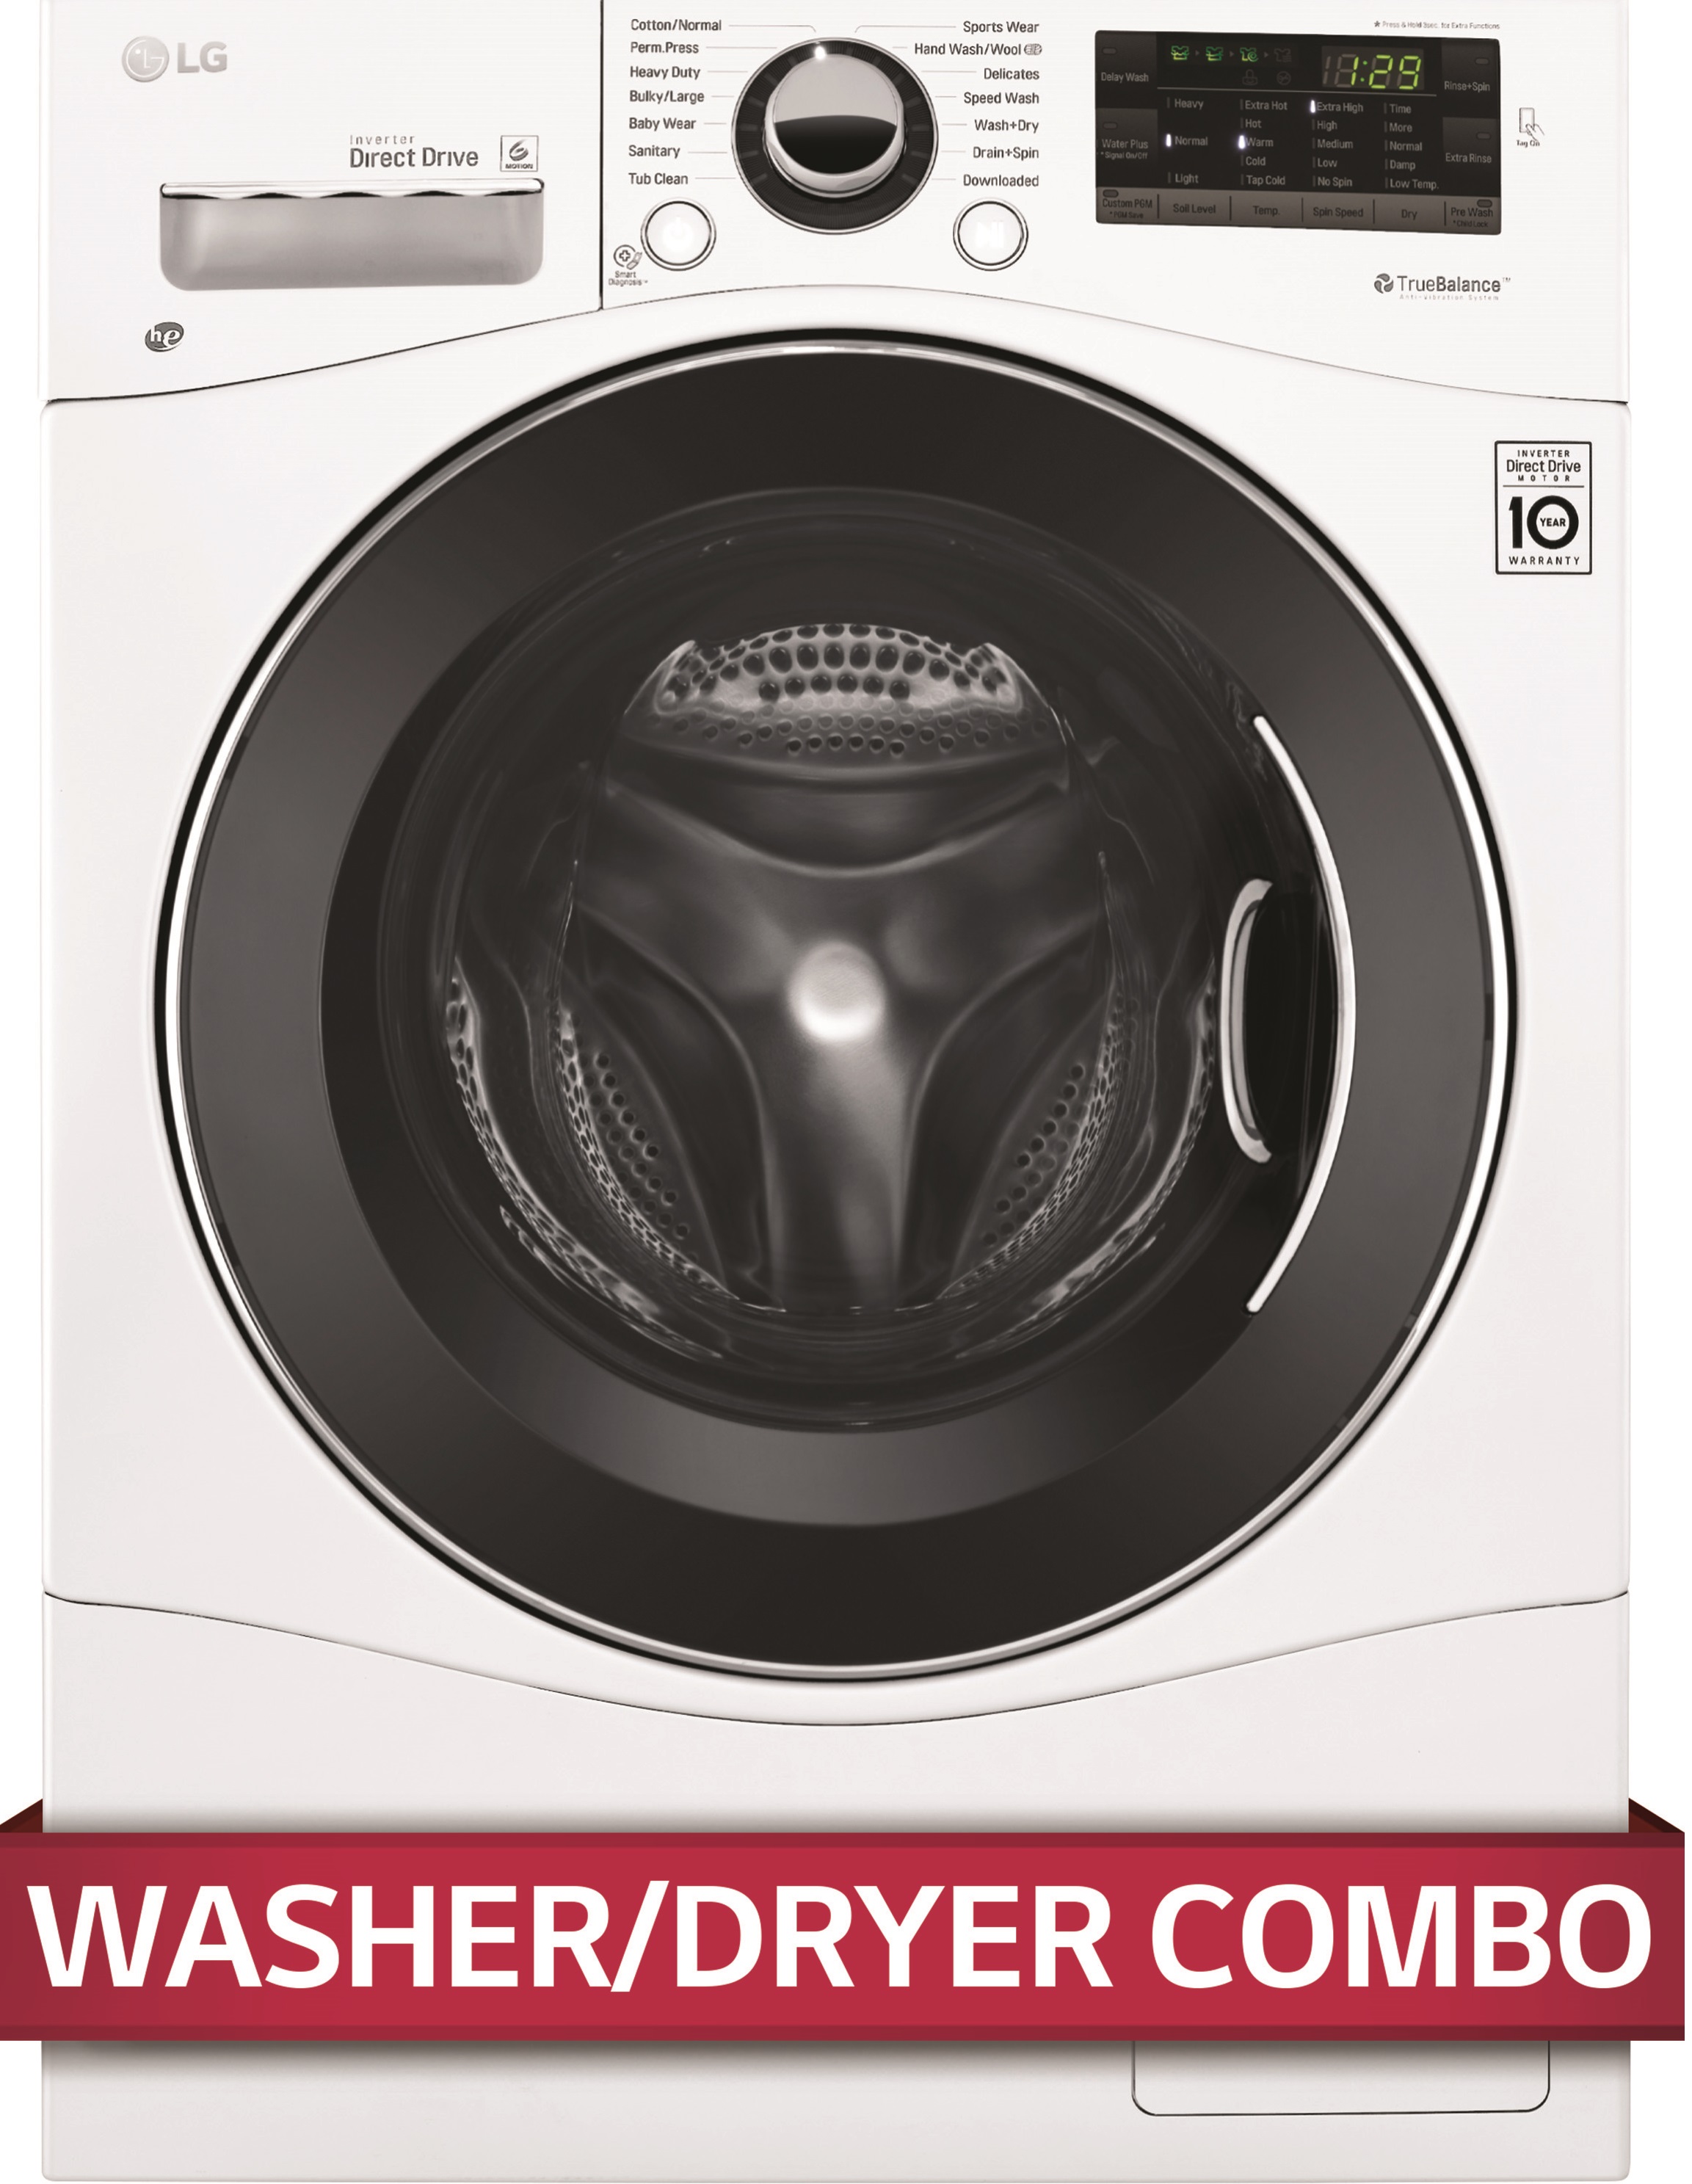 Front view of LG WM3488HW washer dryer with graphic banner